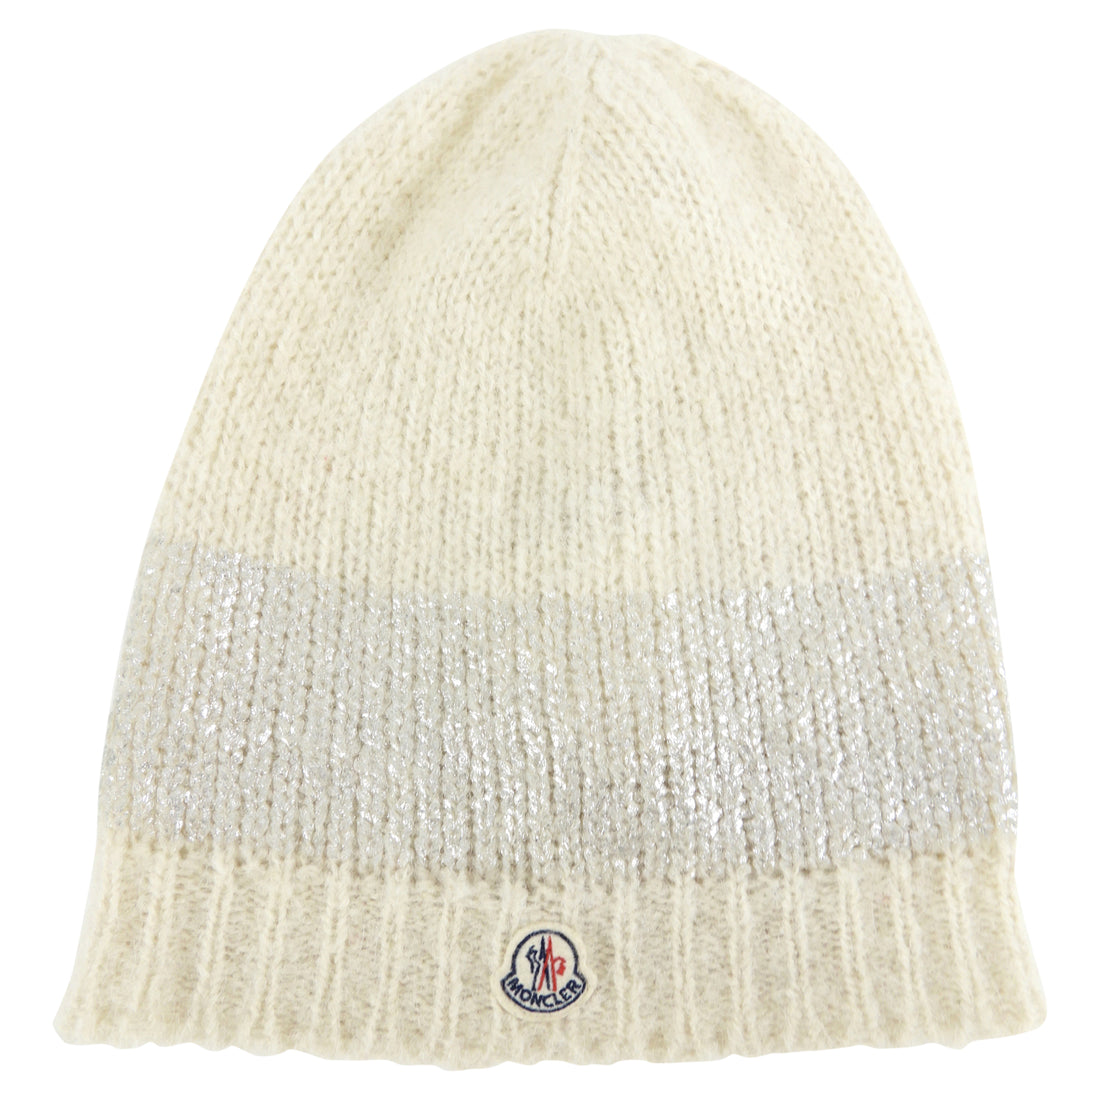 Moncler Ivory and Silver Metallic Knit Toque Hat